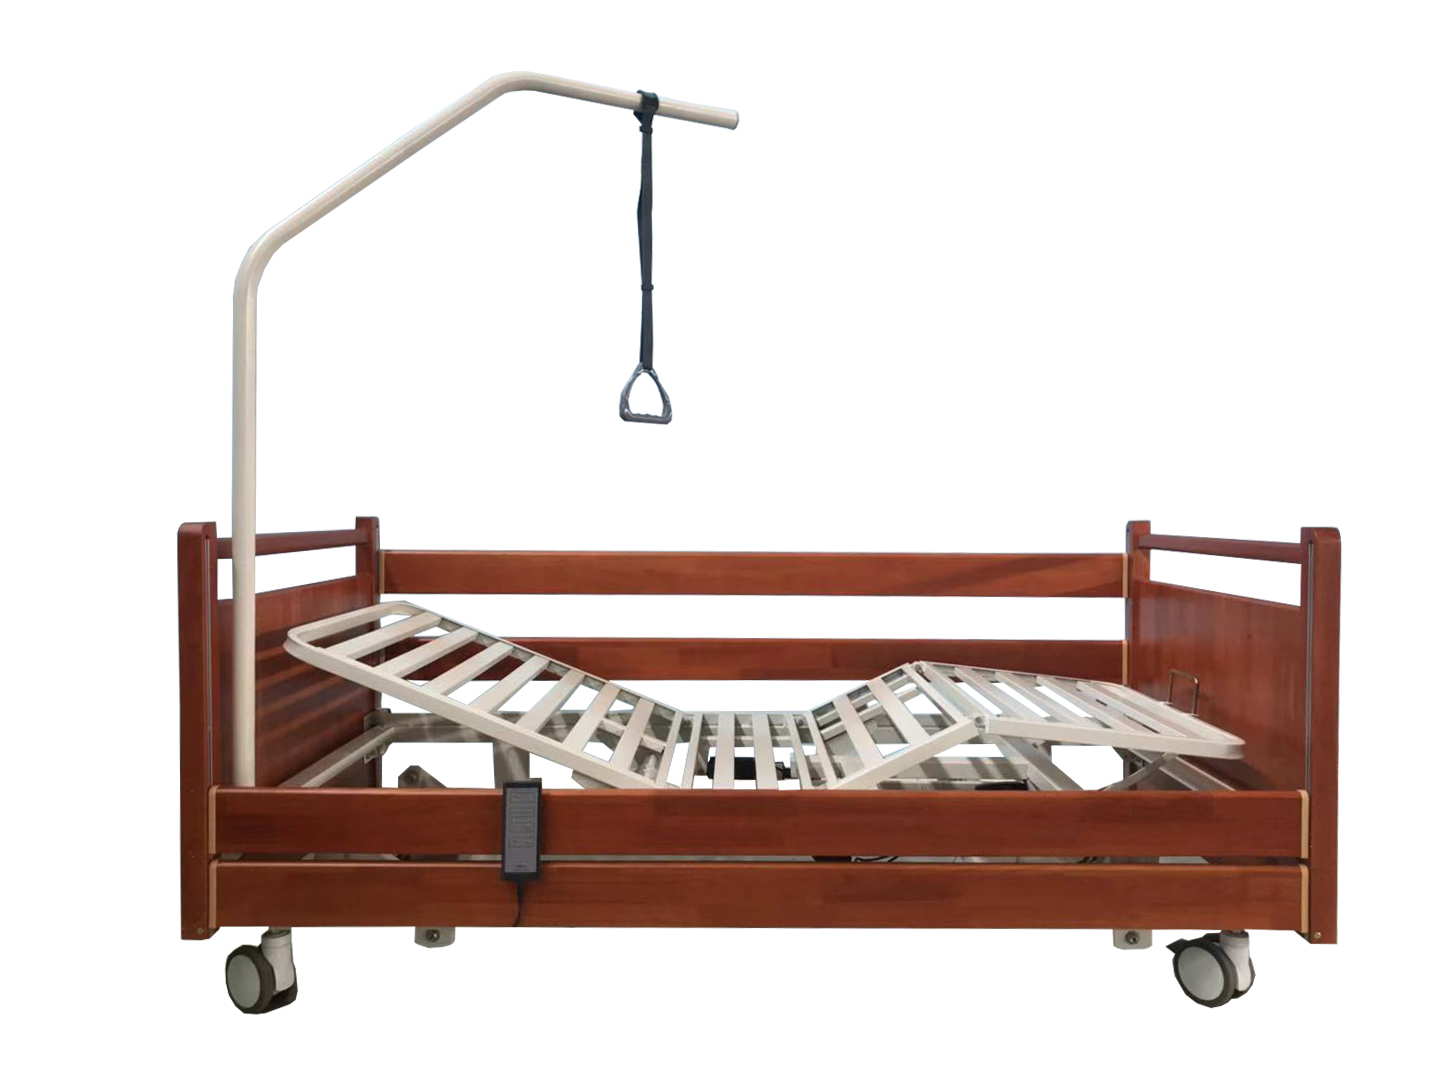 Home Hospital Beds For Couples - Transfer Master